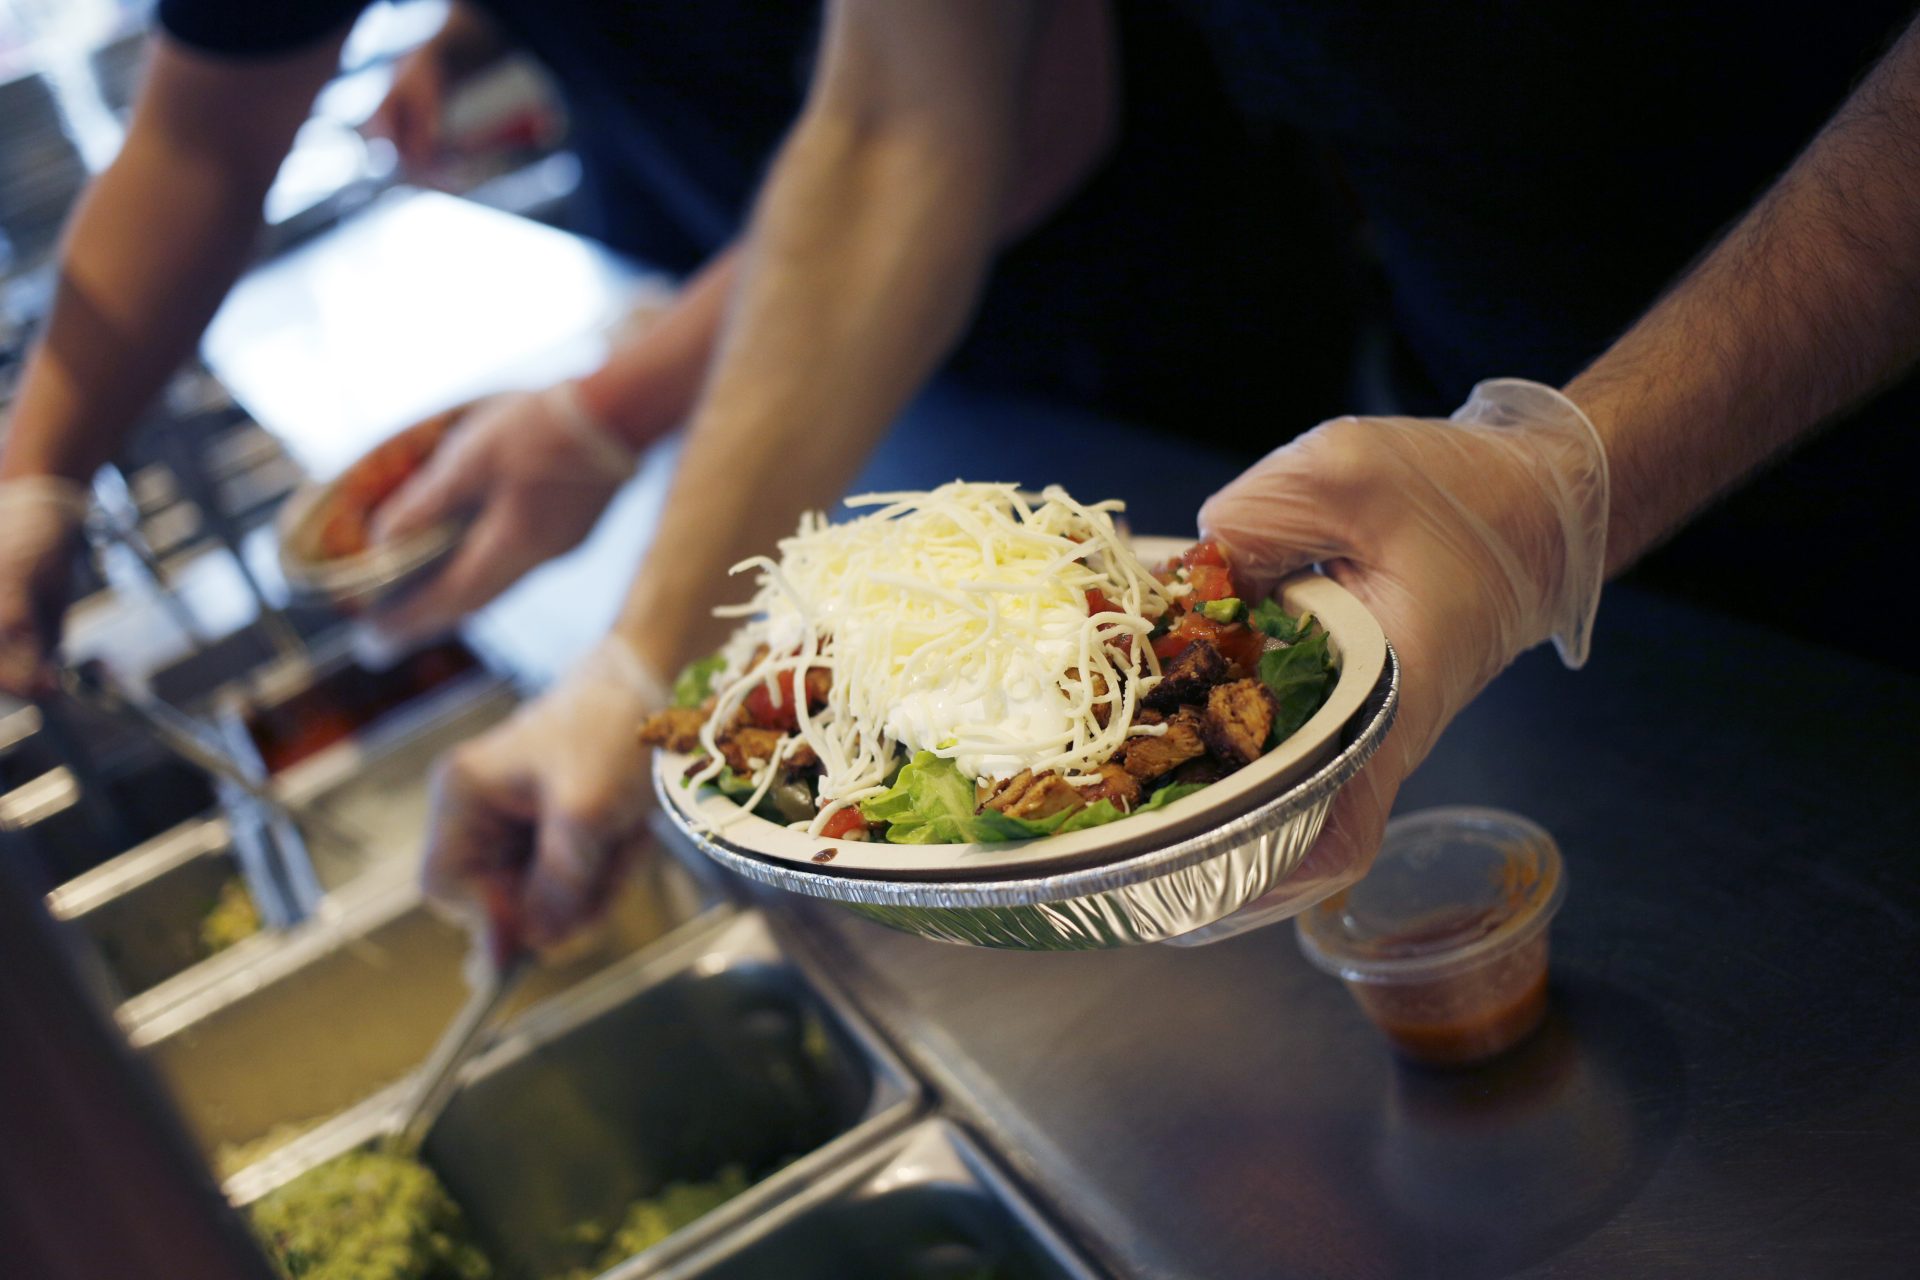 Chipotle Files Lawsuit Against Sweetgreen Over Their New 'Chipotle Chicken Burrito Bowl'